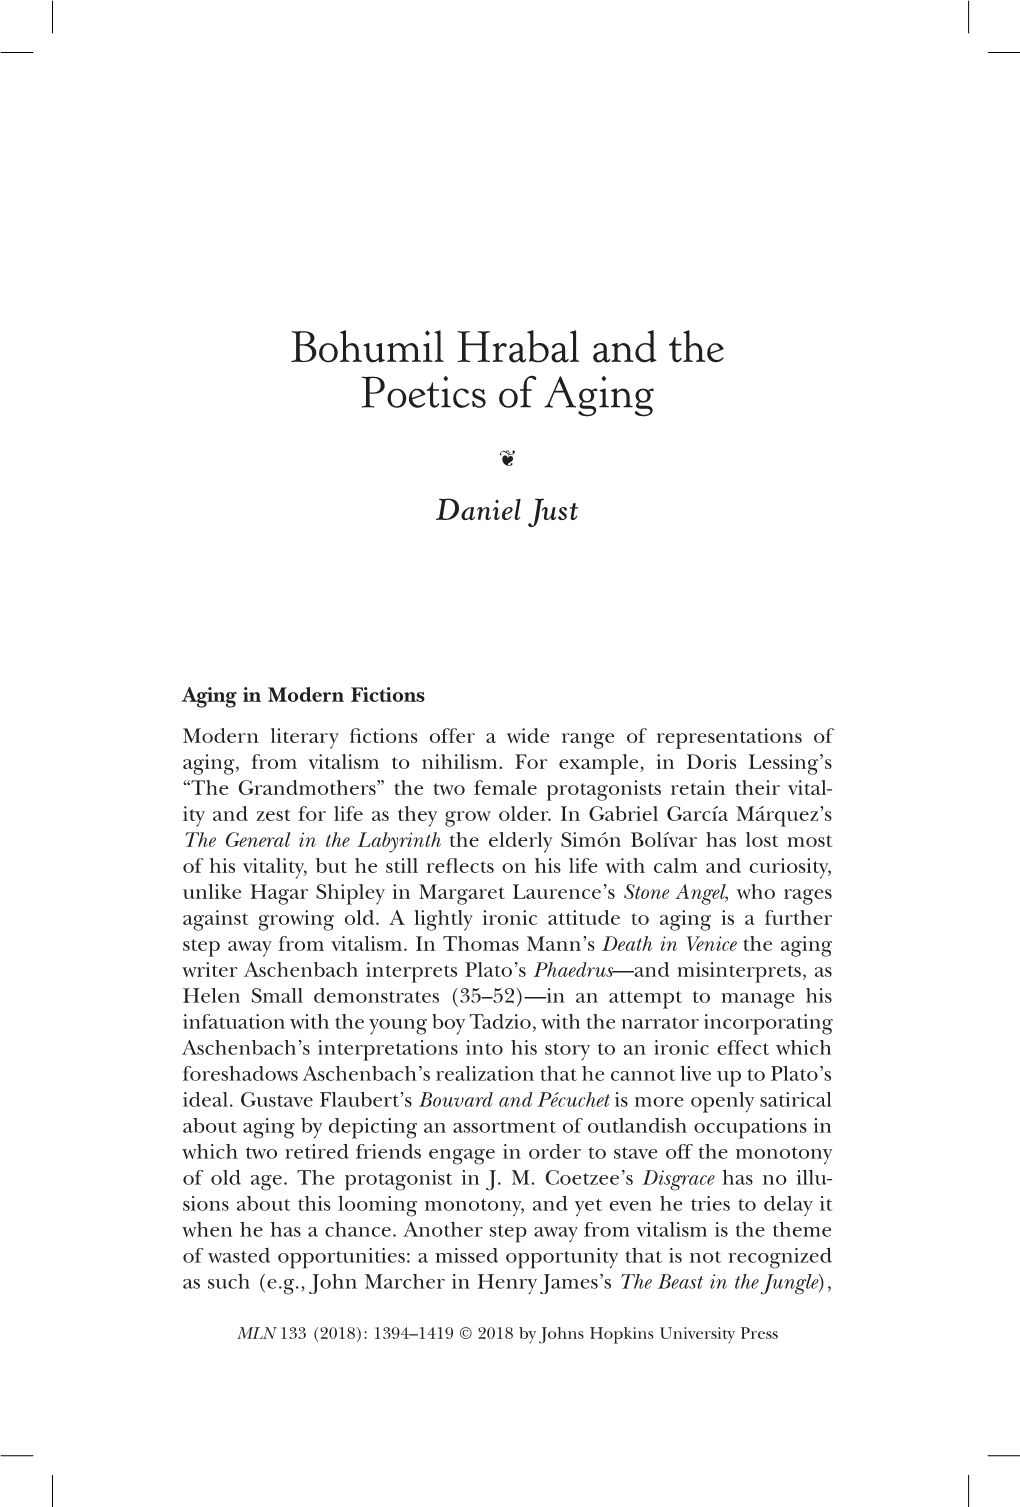 Bohumil Hrabal and the Poetics of Aging